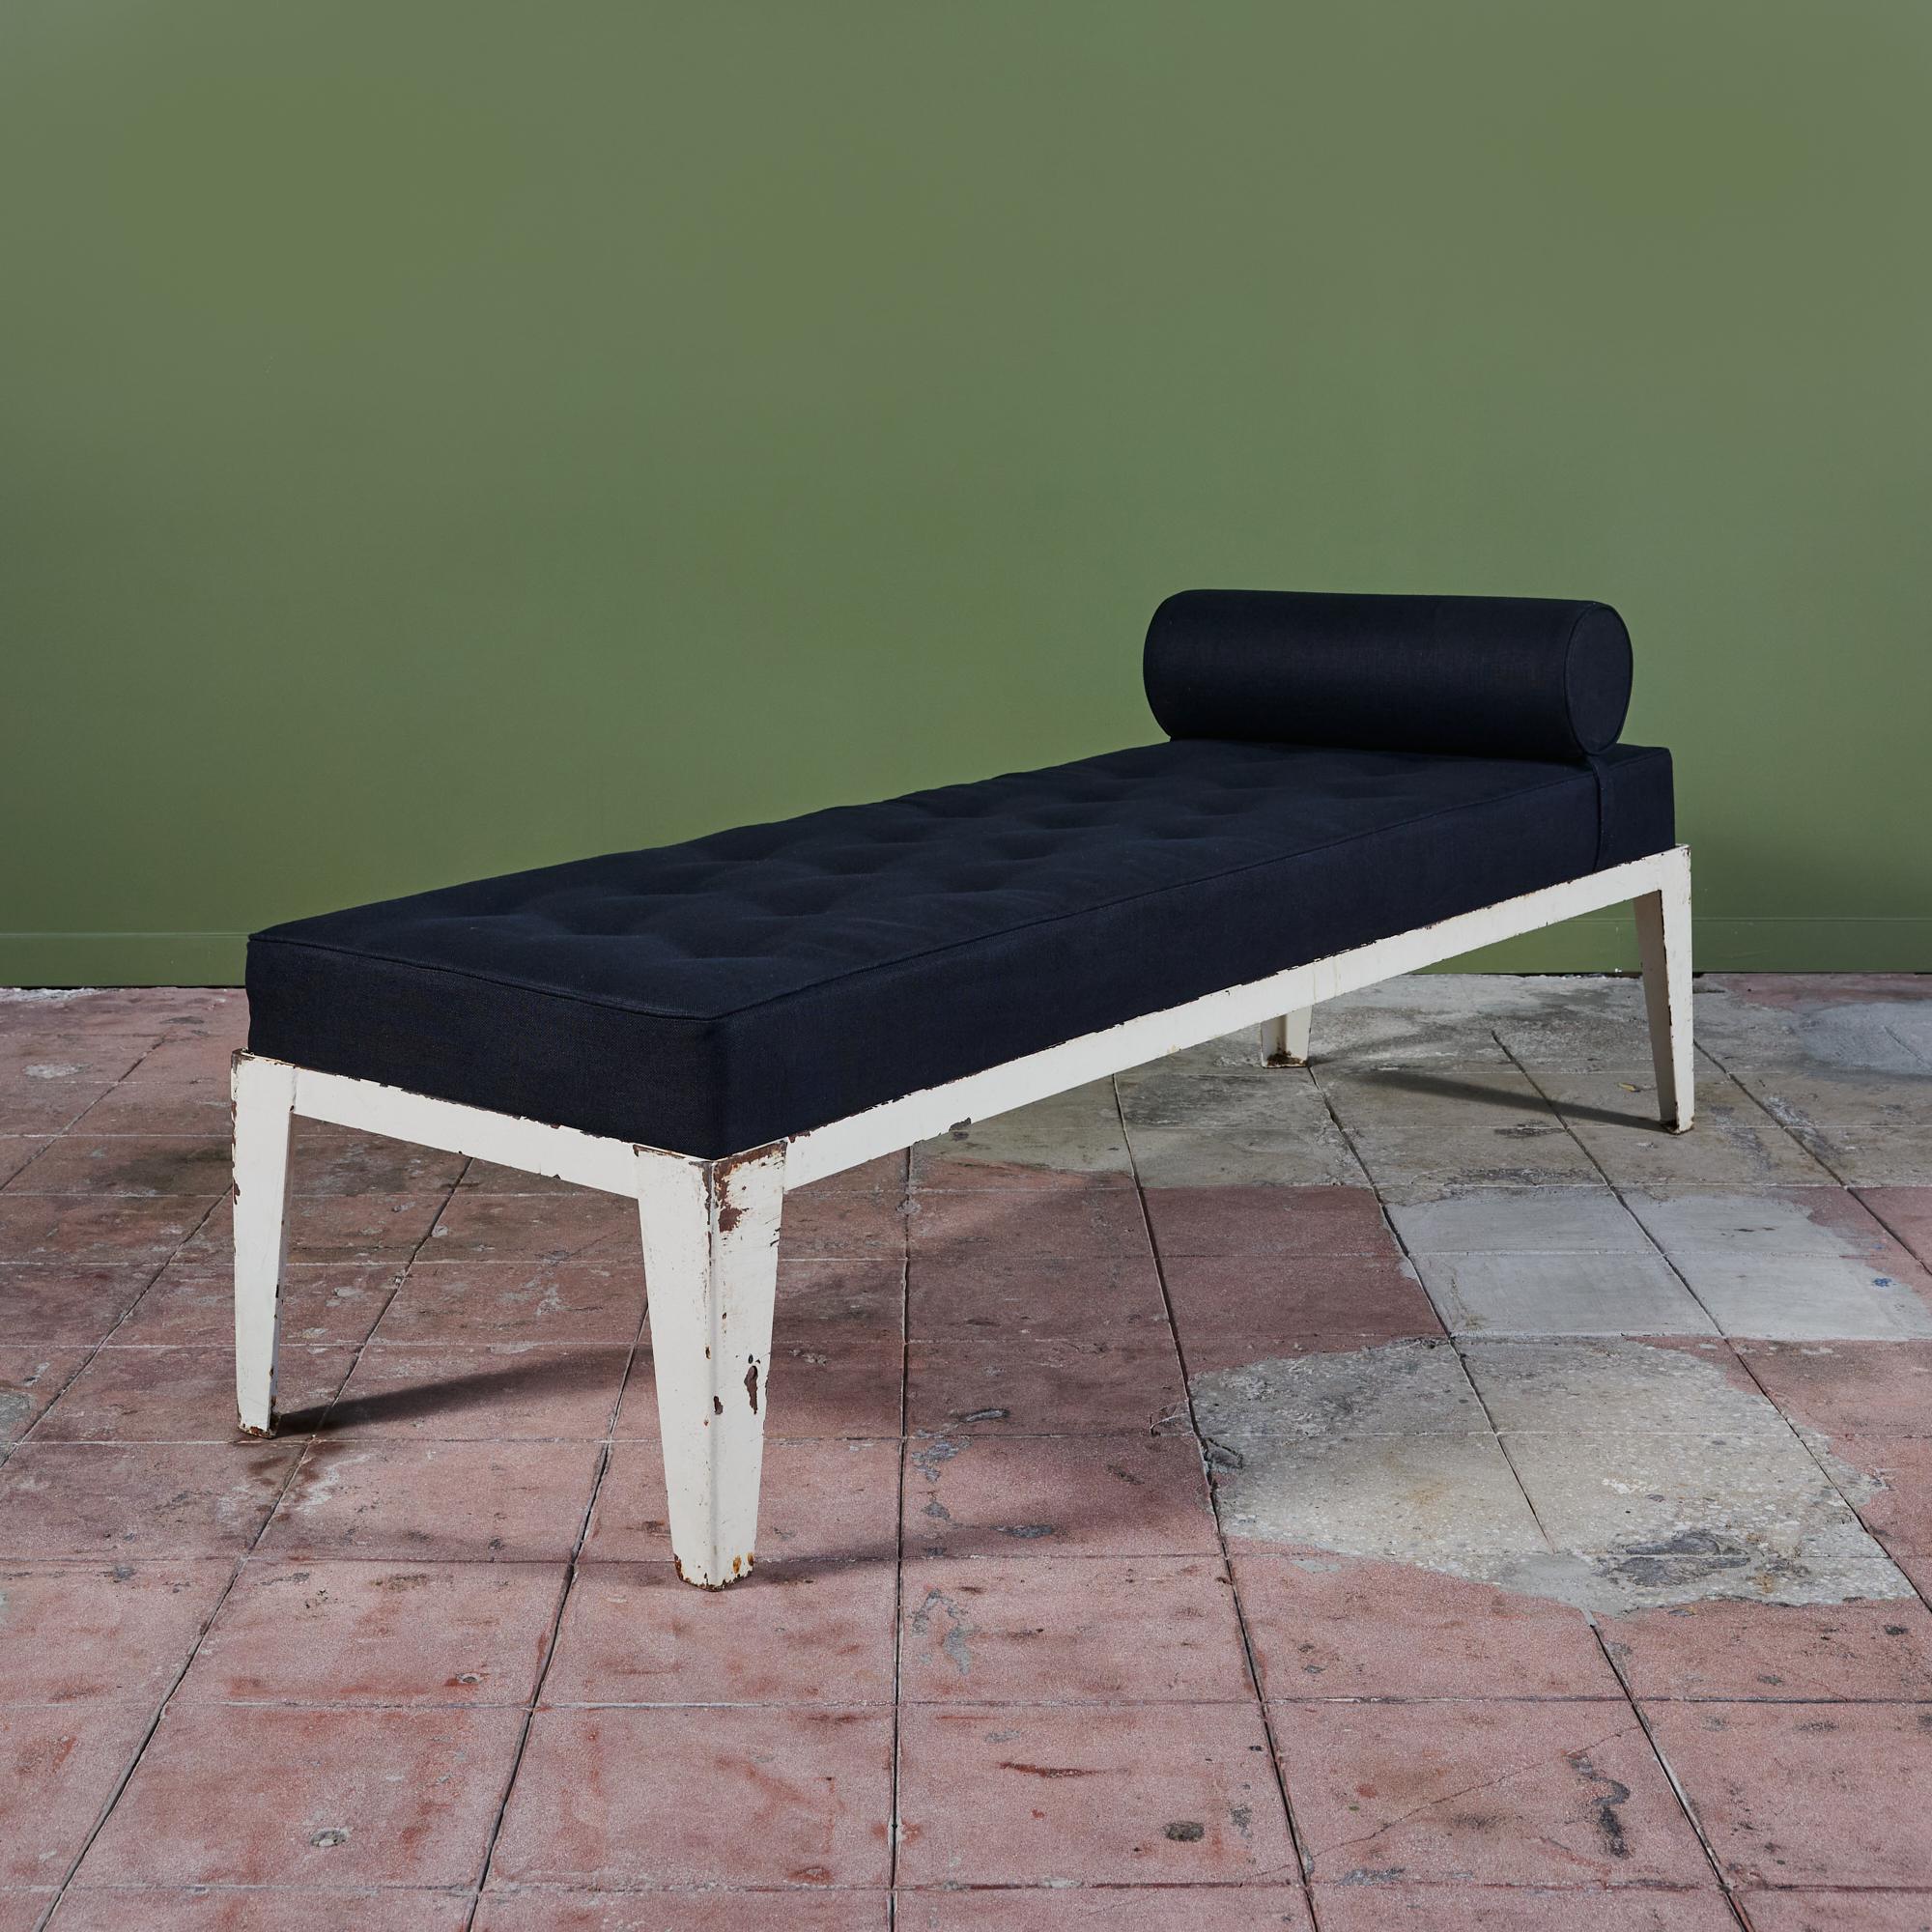 Patinated steel daybed with tufted cushion in black cotton linen fabric with bolster. This piece can also be used in an outdoor setting with an outdoor fabric. We have four frames available, please inquire for COM. 

Dimensions
81.5” width x 27.5”